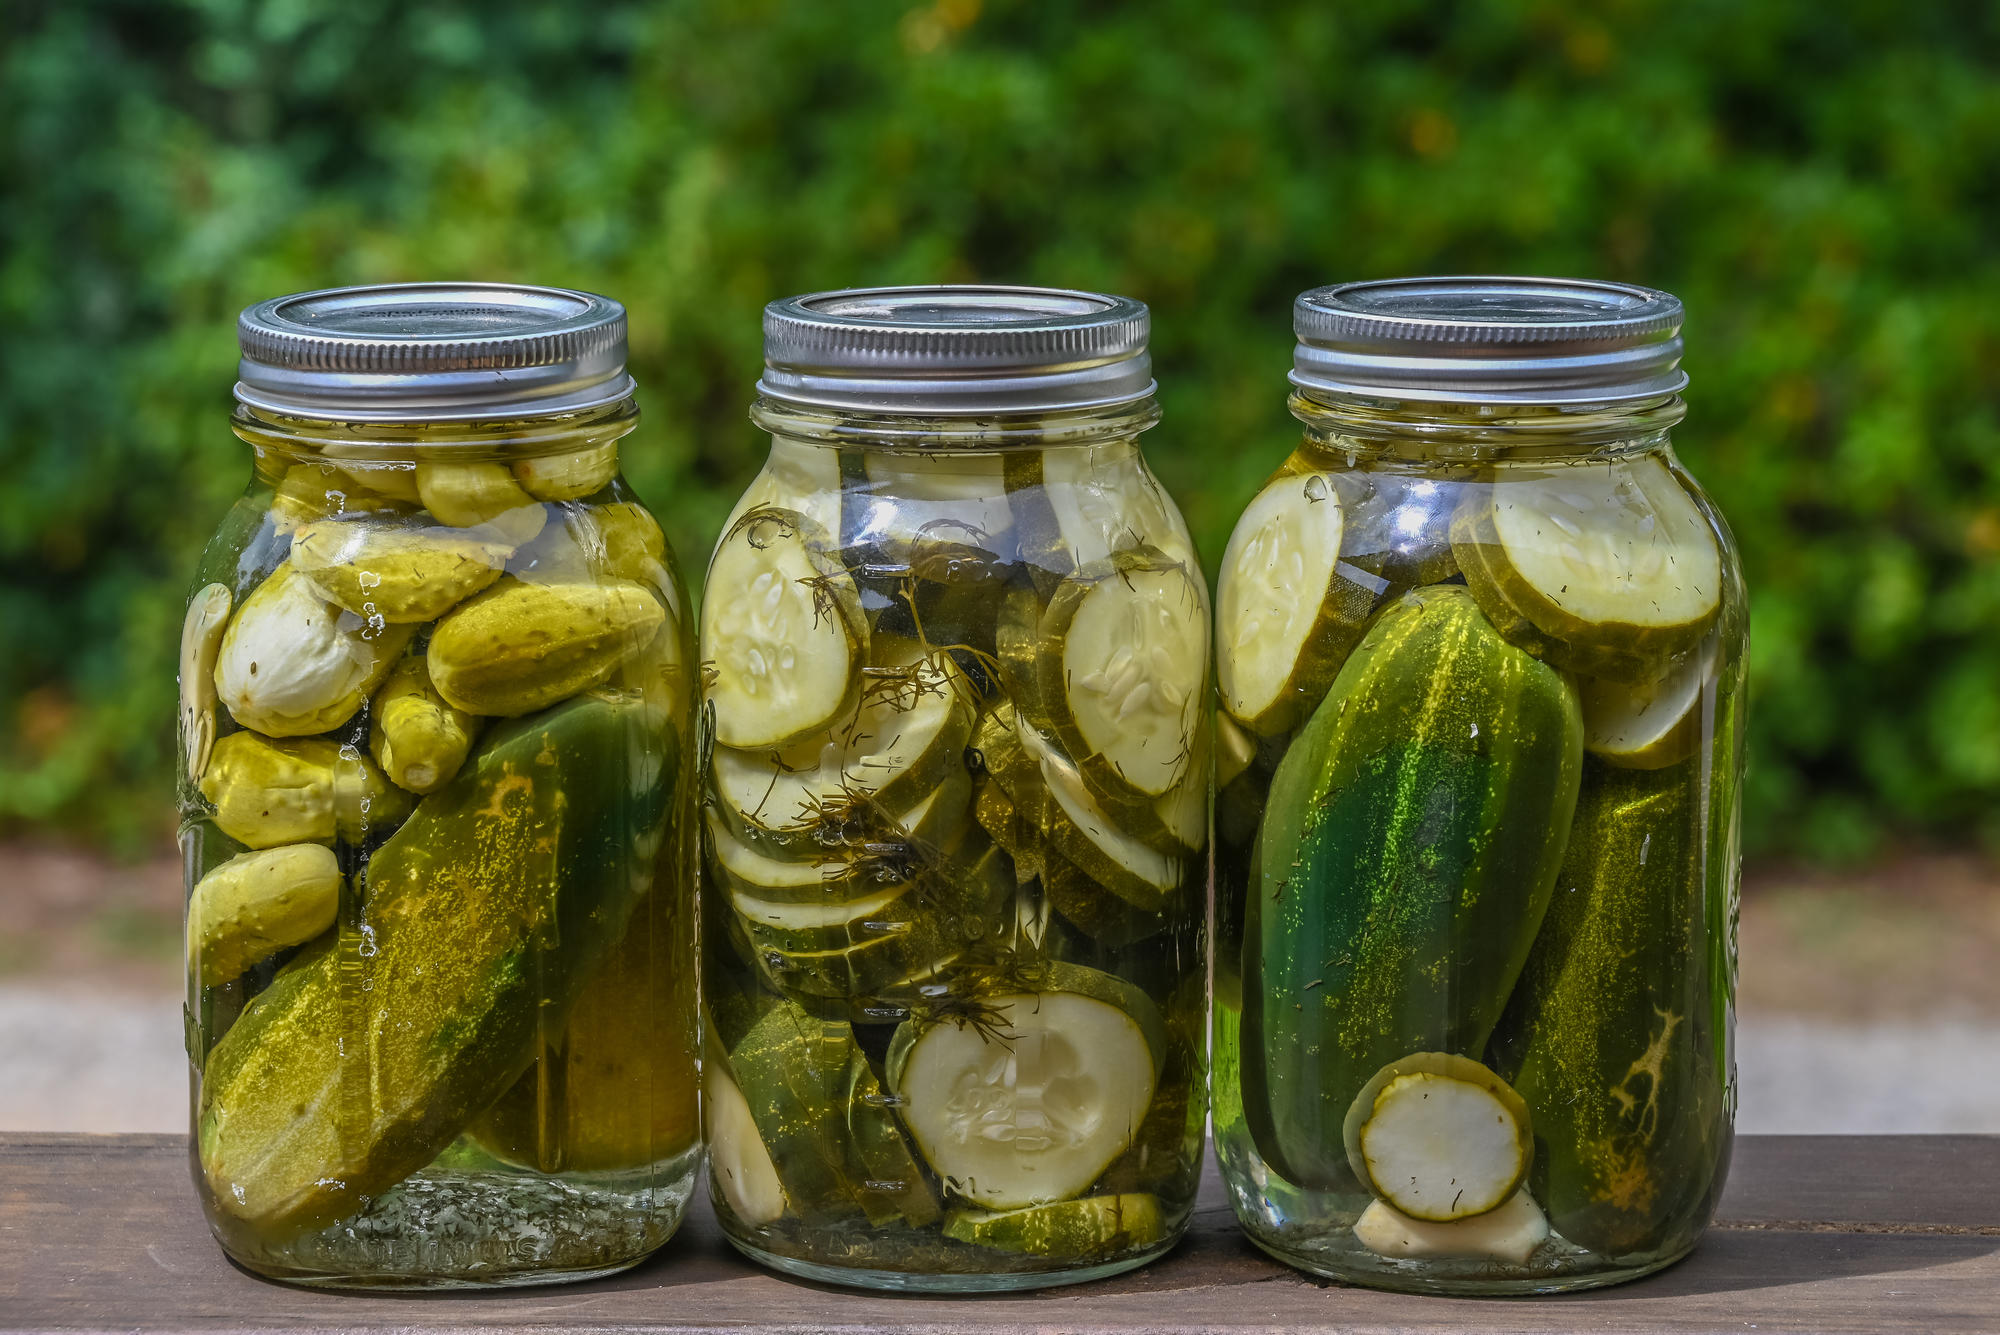 Three jars of home made dill pickles.